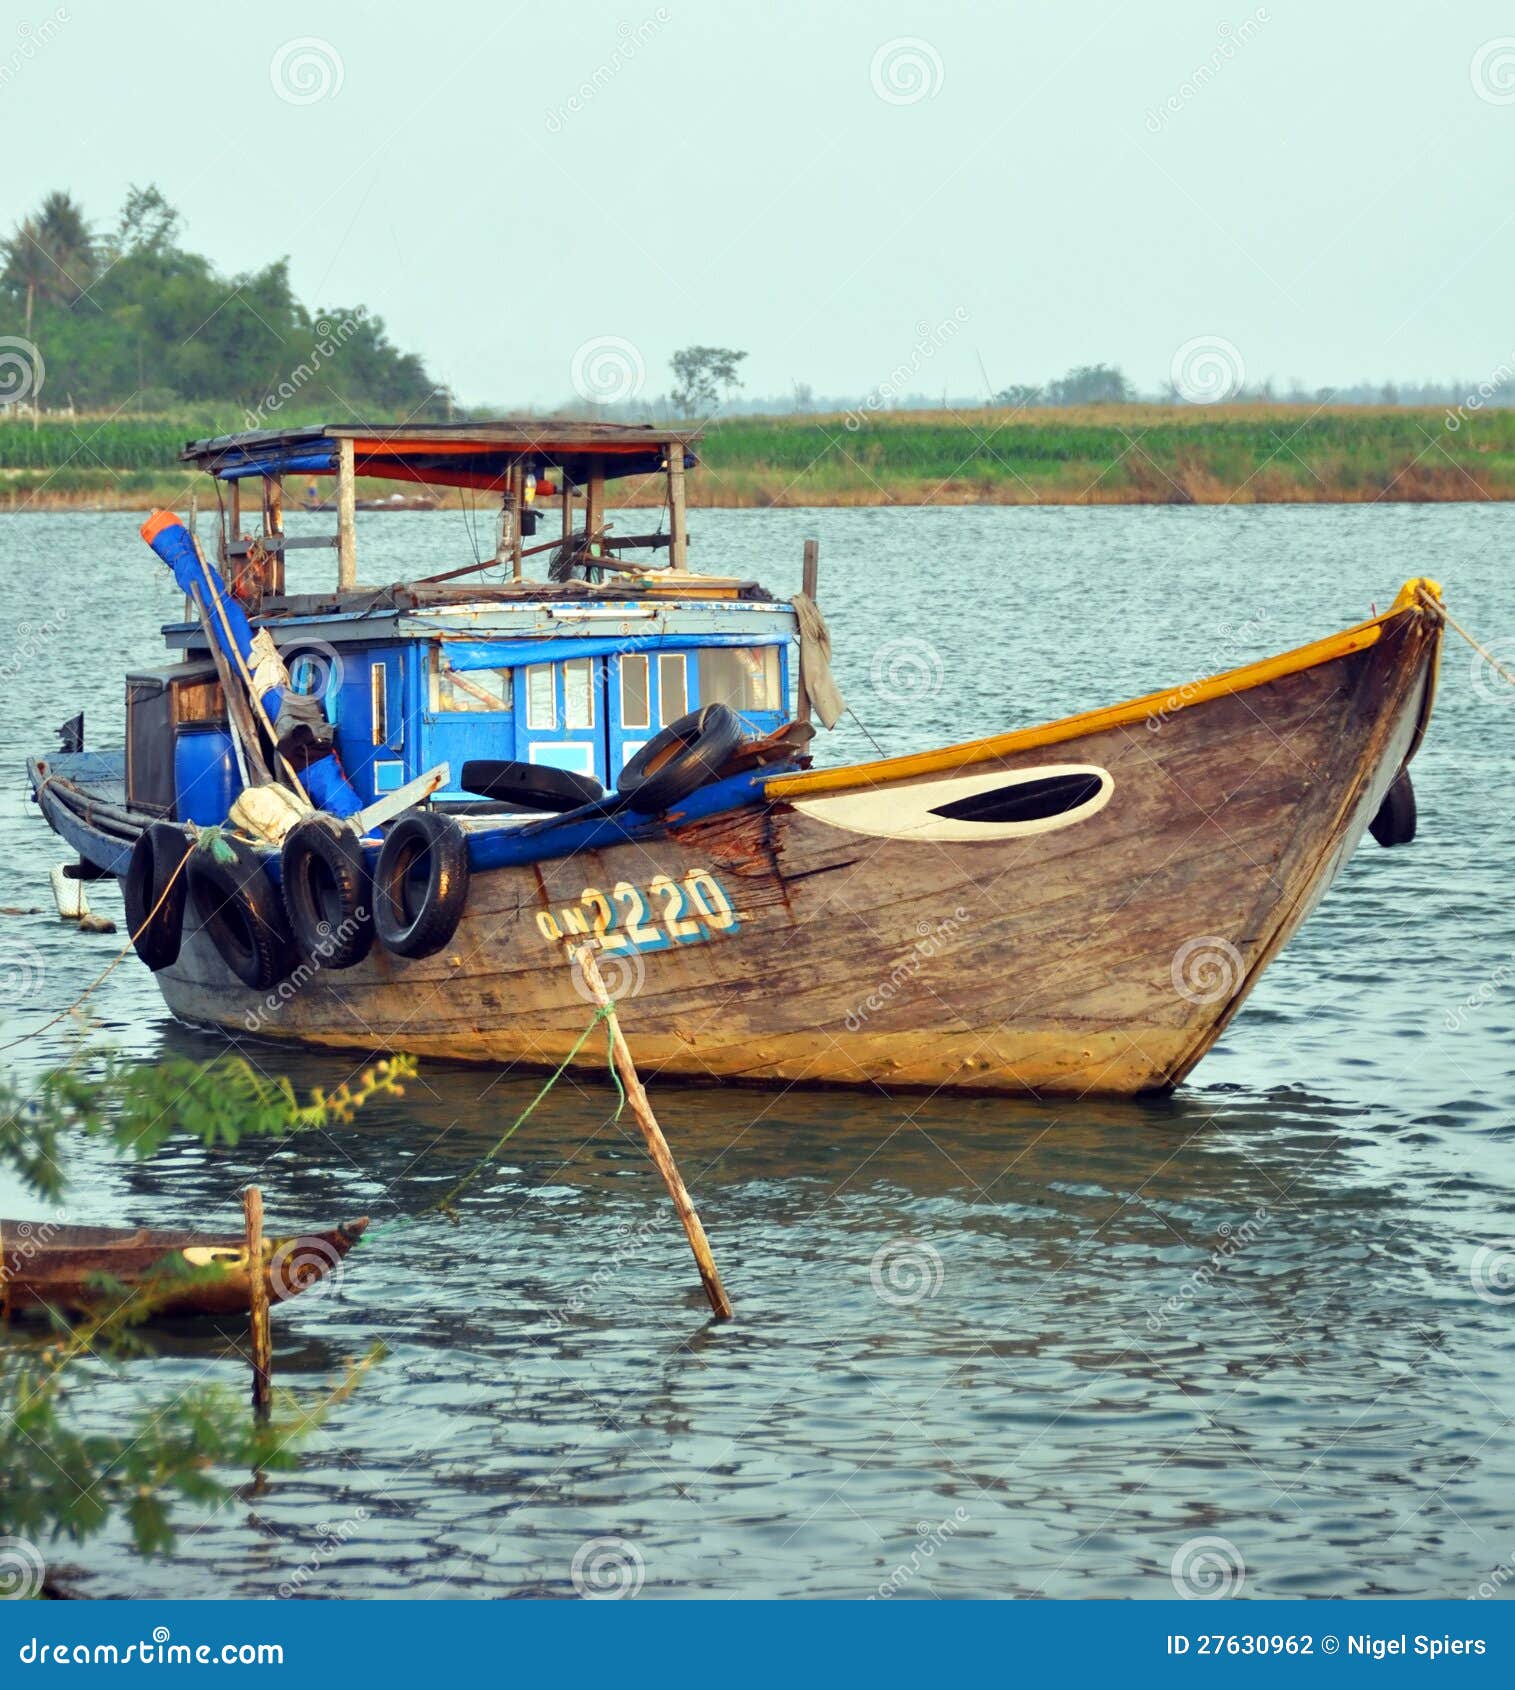 Fishing Boat On Hoi An River, Vietnam. Editorial 